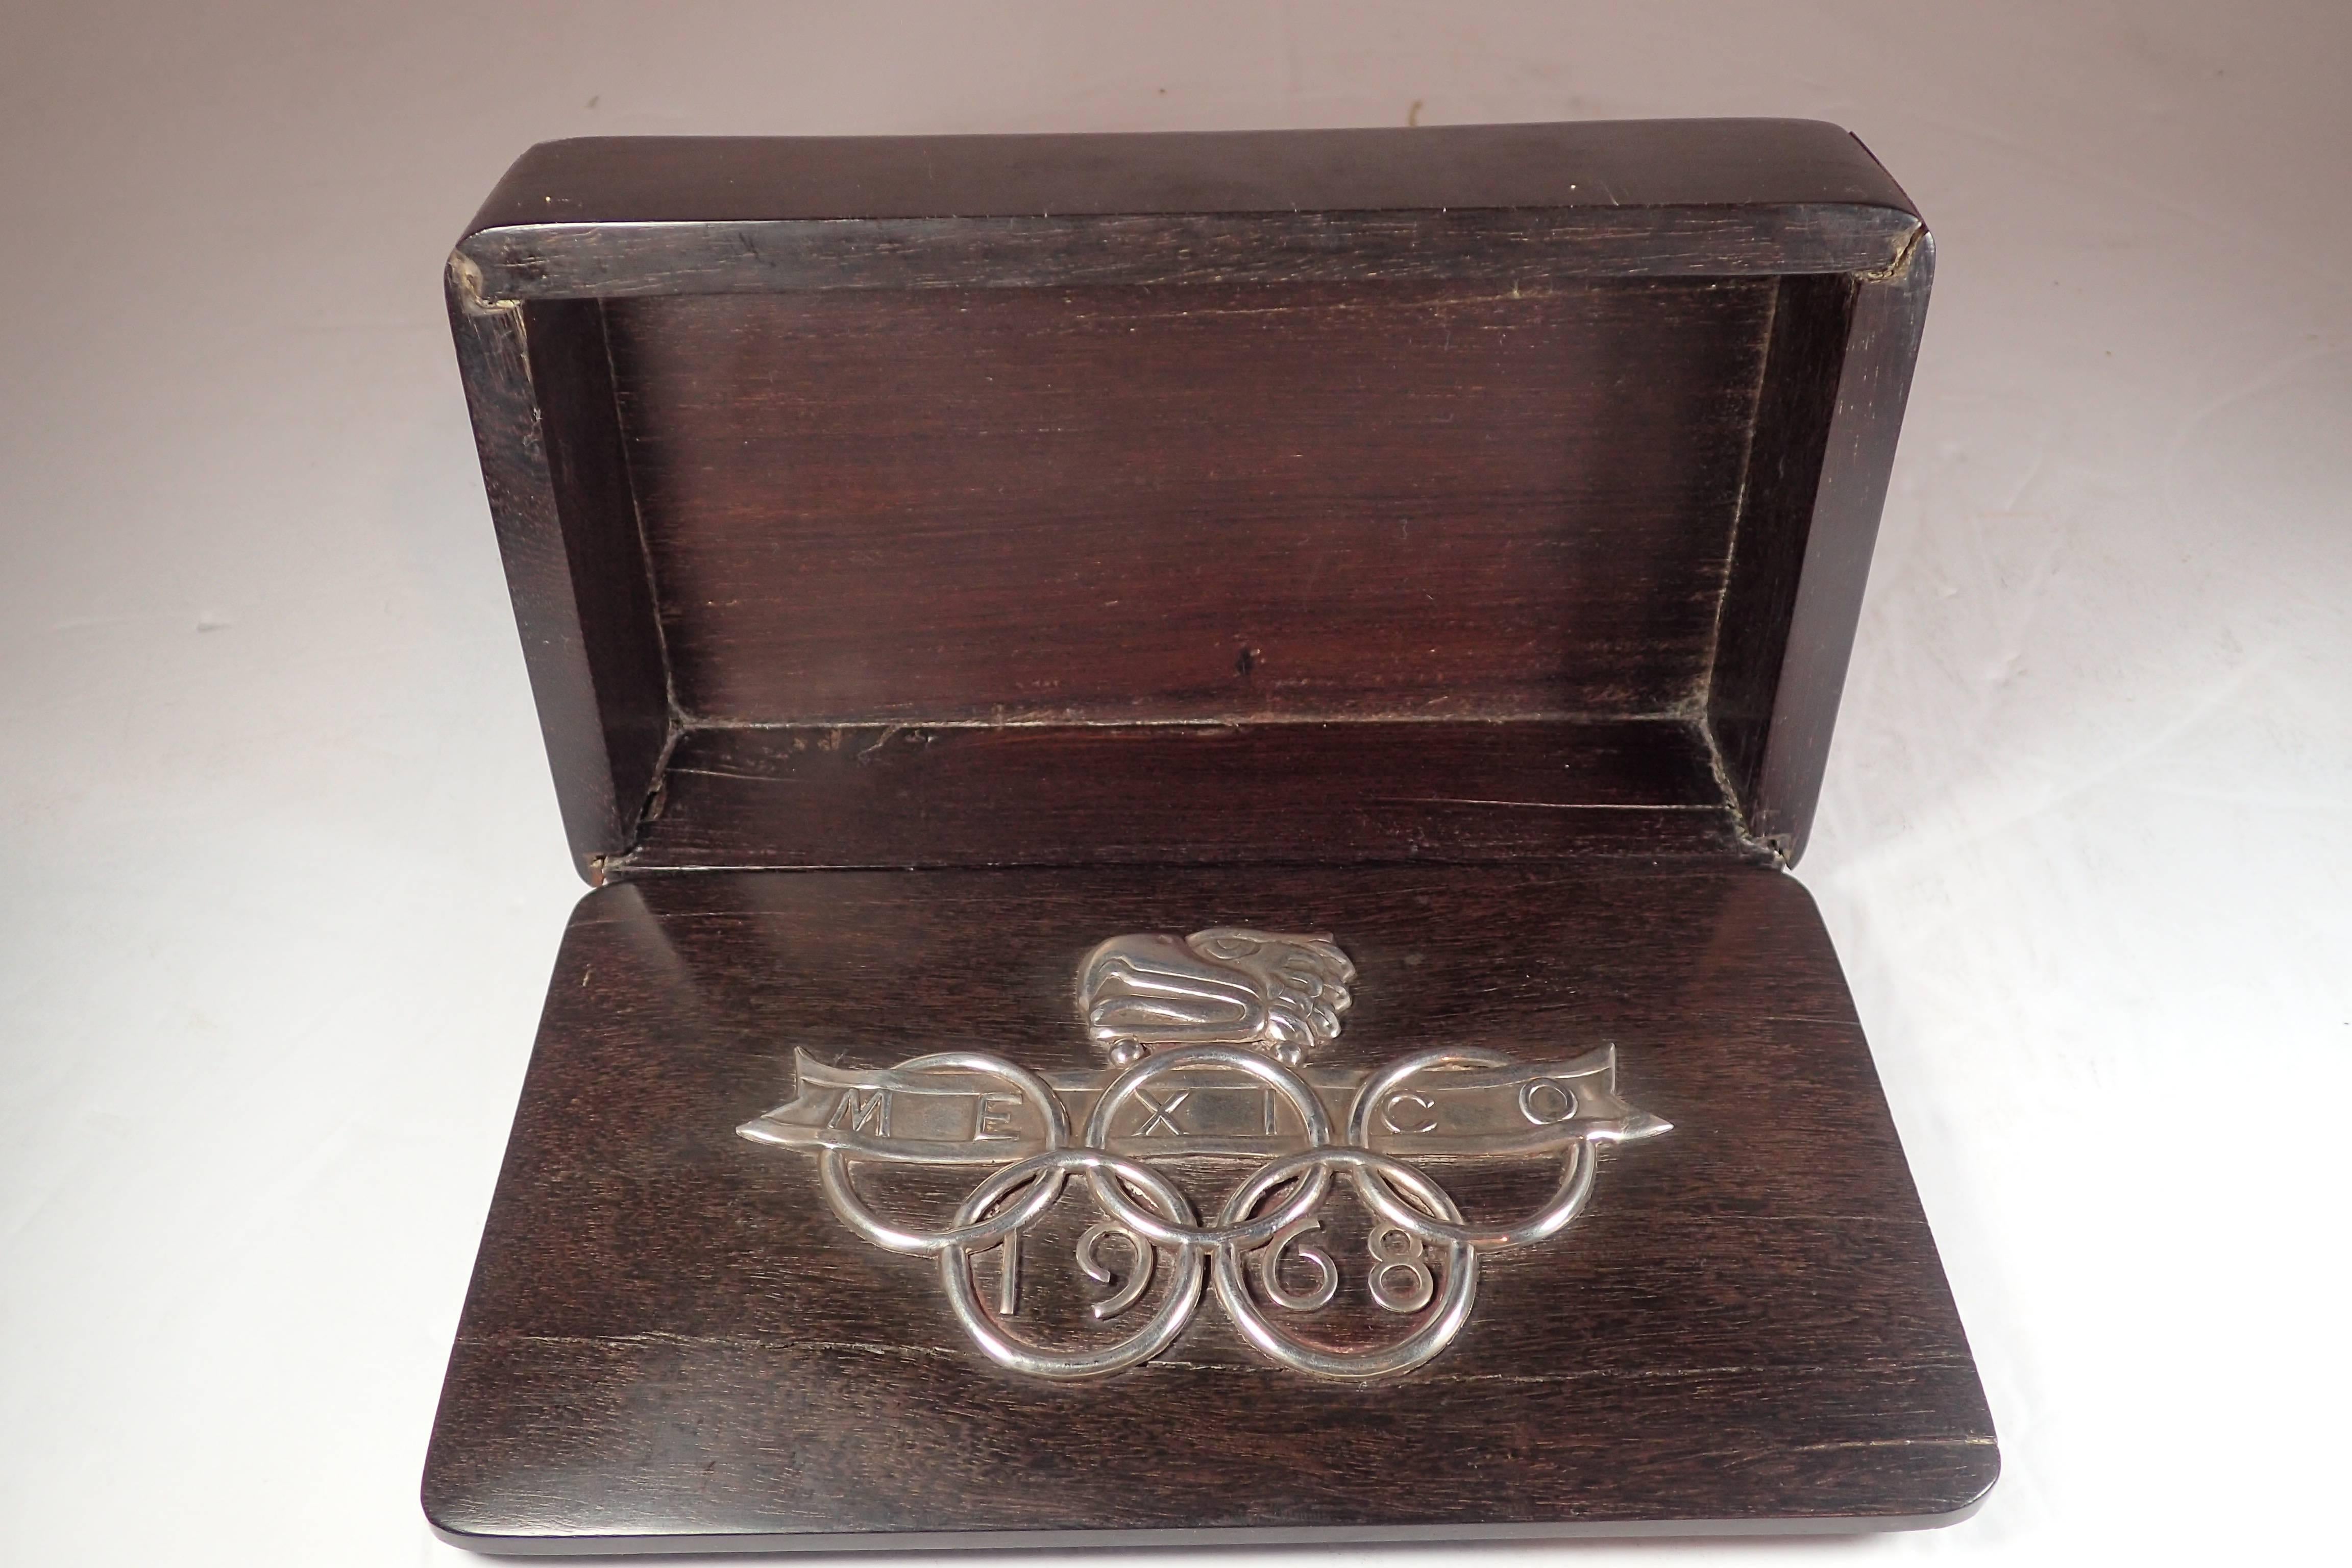 William Spratling 1968 wood and silver box. Cast silver details attached to the removable lid. Negotiable price for distress. Great decorative piece, or for a collection of cigar boxes. 